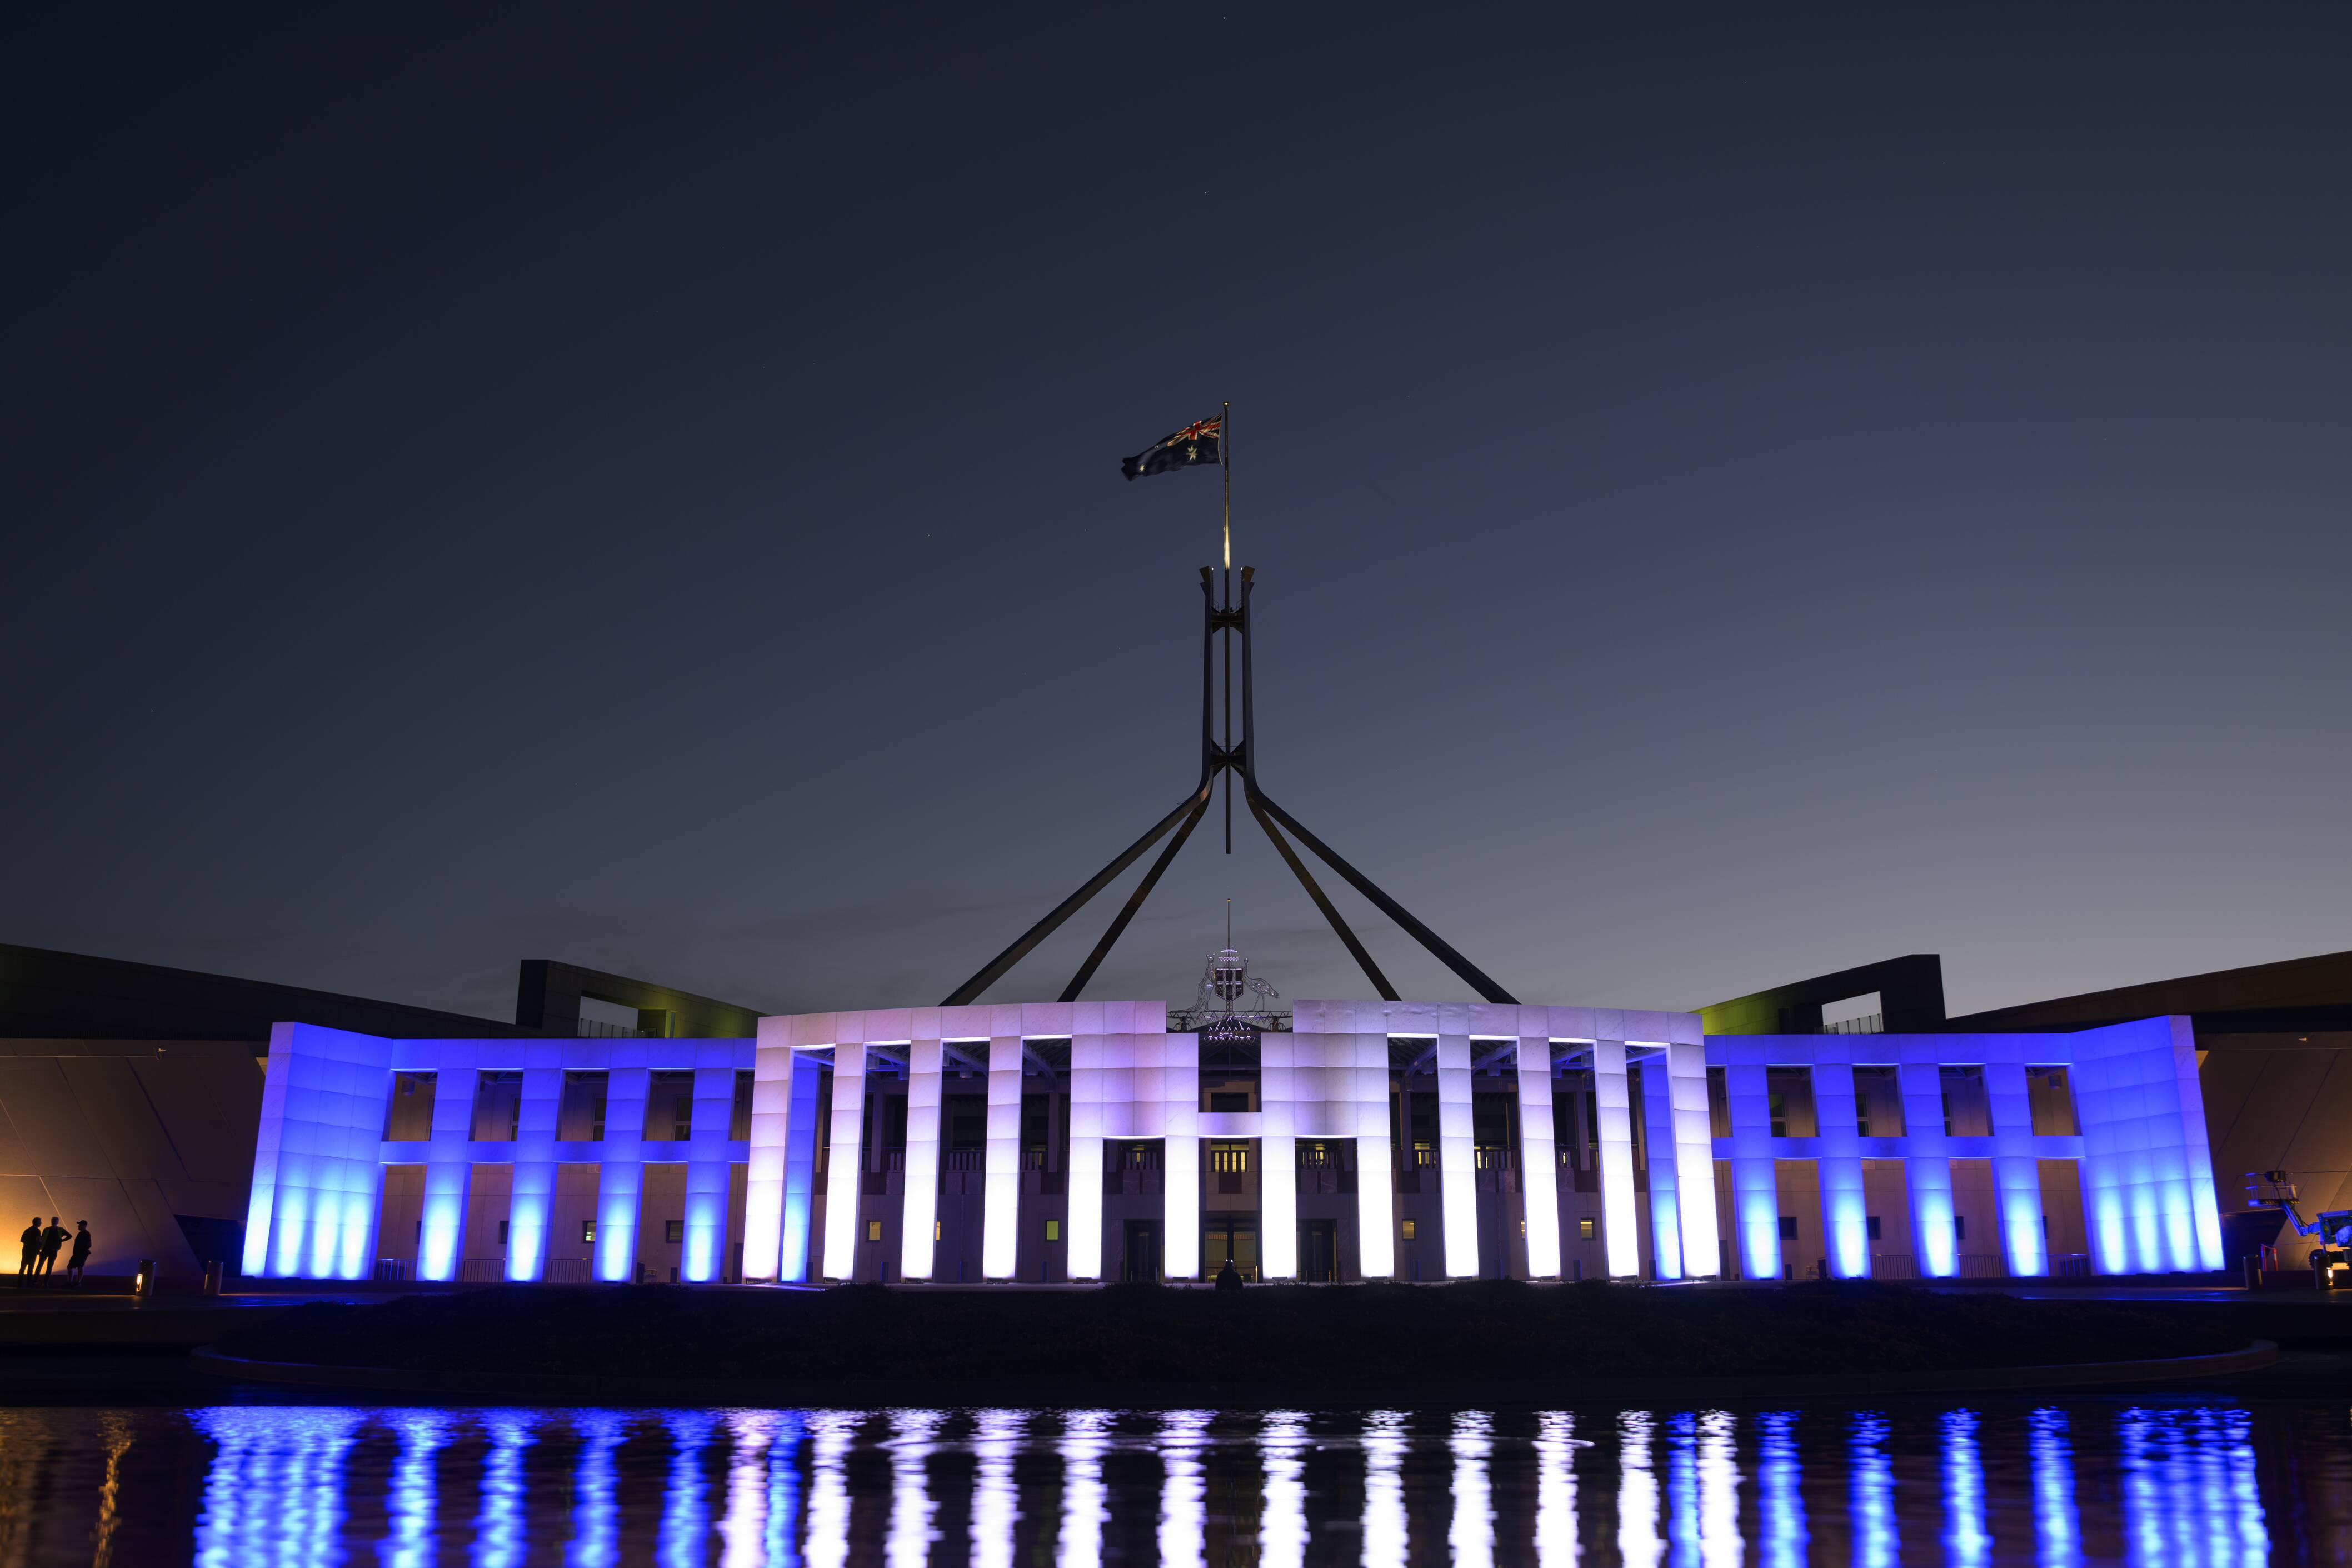 Australian cities light landmarks in support of Israel, The Canberra Times